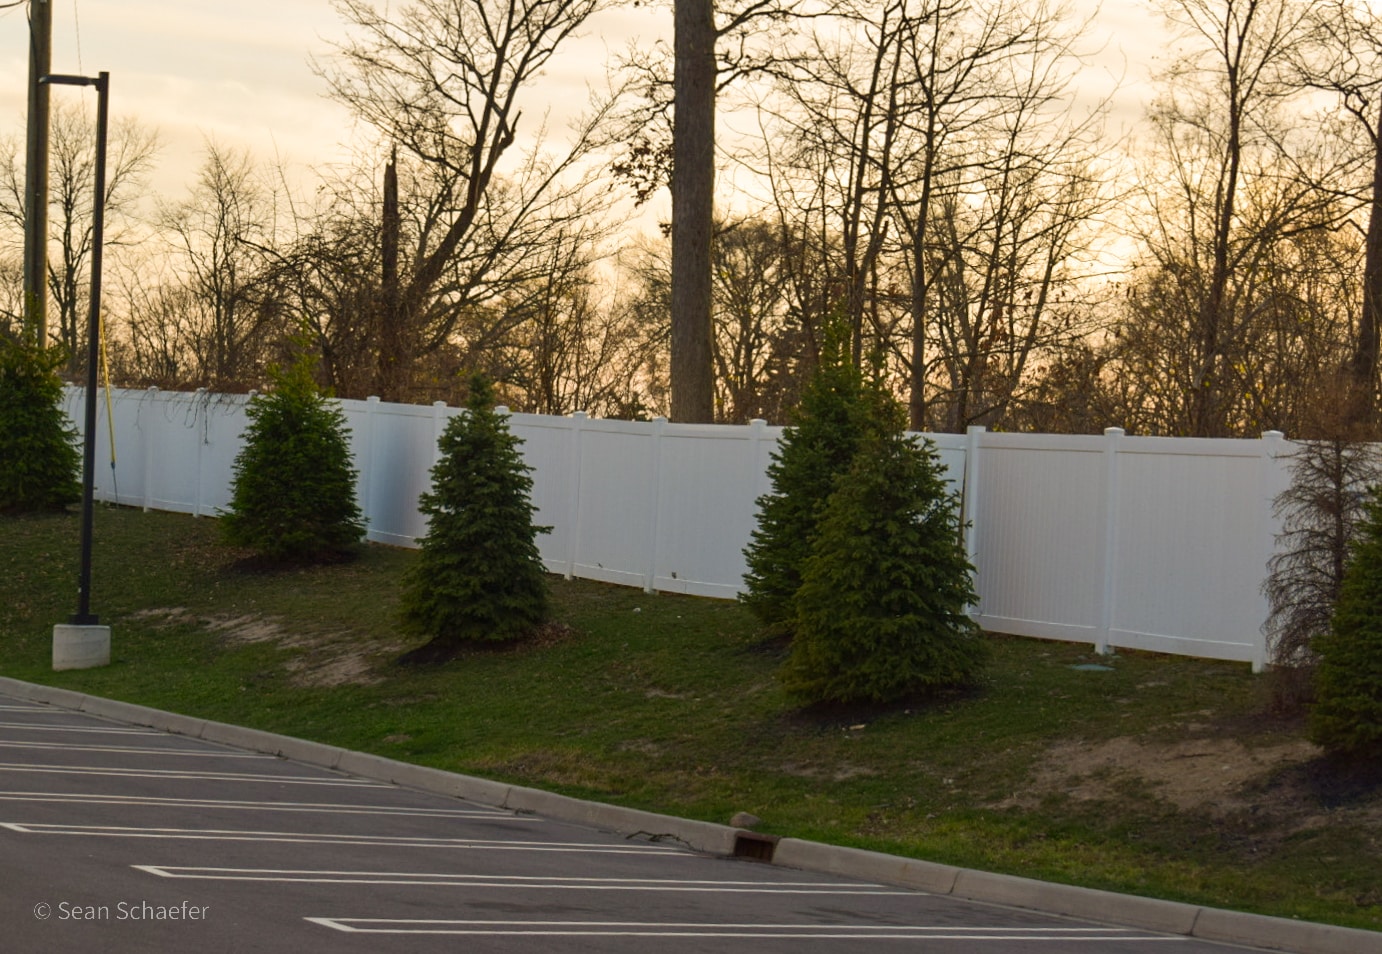 Image of PVC / vinyl privacy fencing at Staybridge Suites